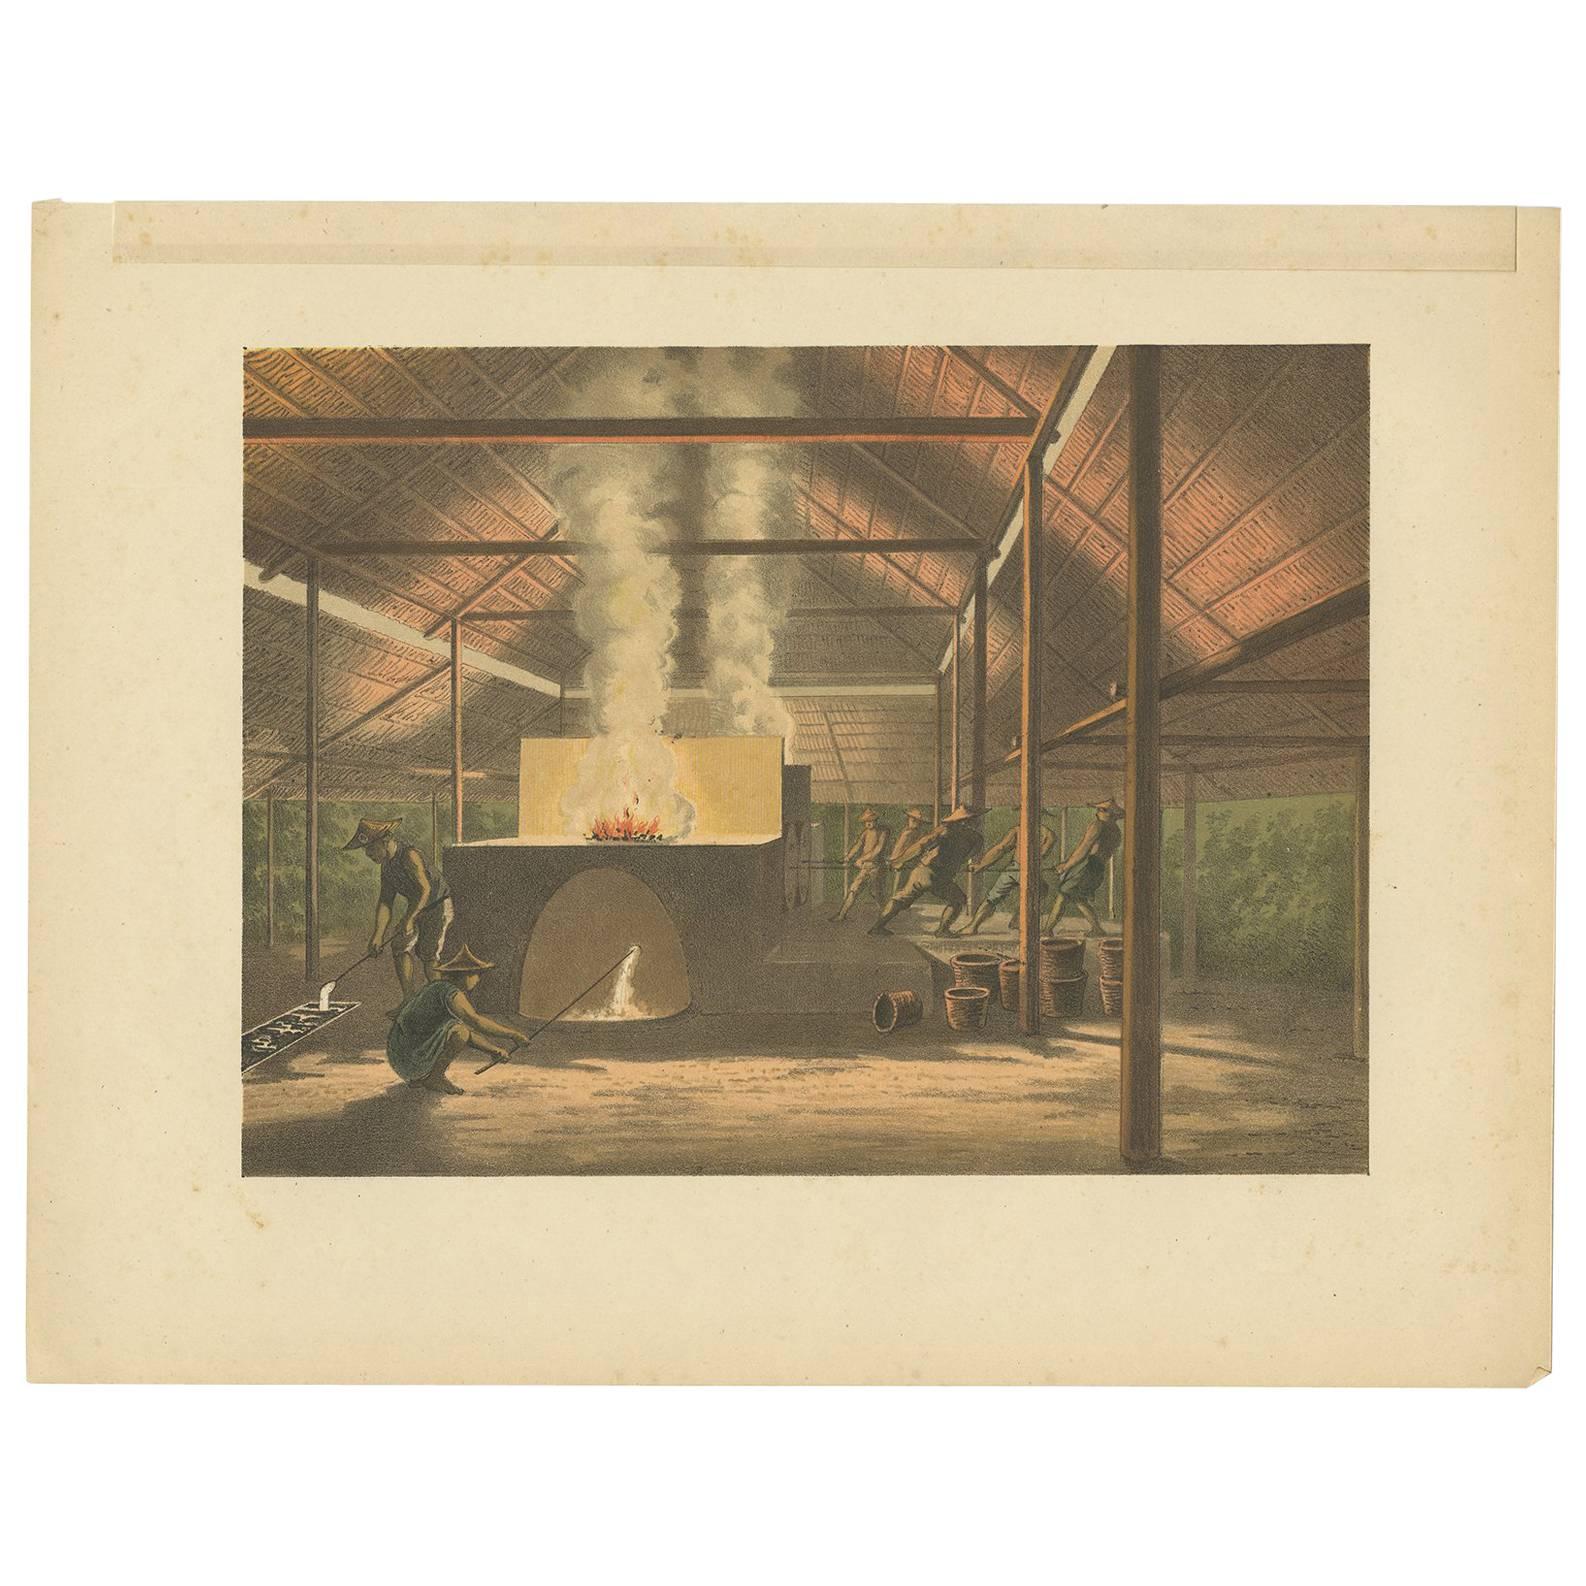 Antique Print of Tin Casting in Indonesia by M.T.H. Perelaer, 1888